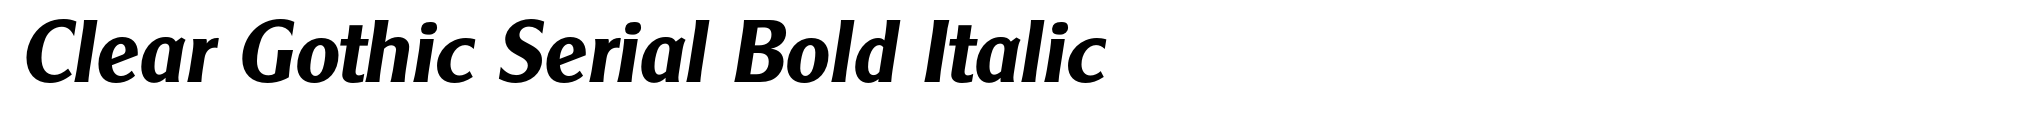 Clear Gothic Serial Bold Italic image